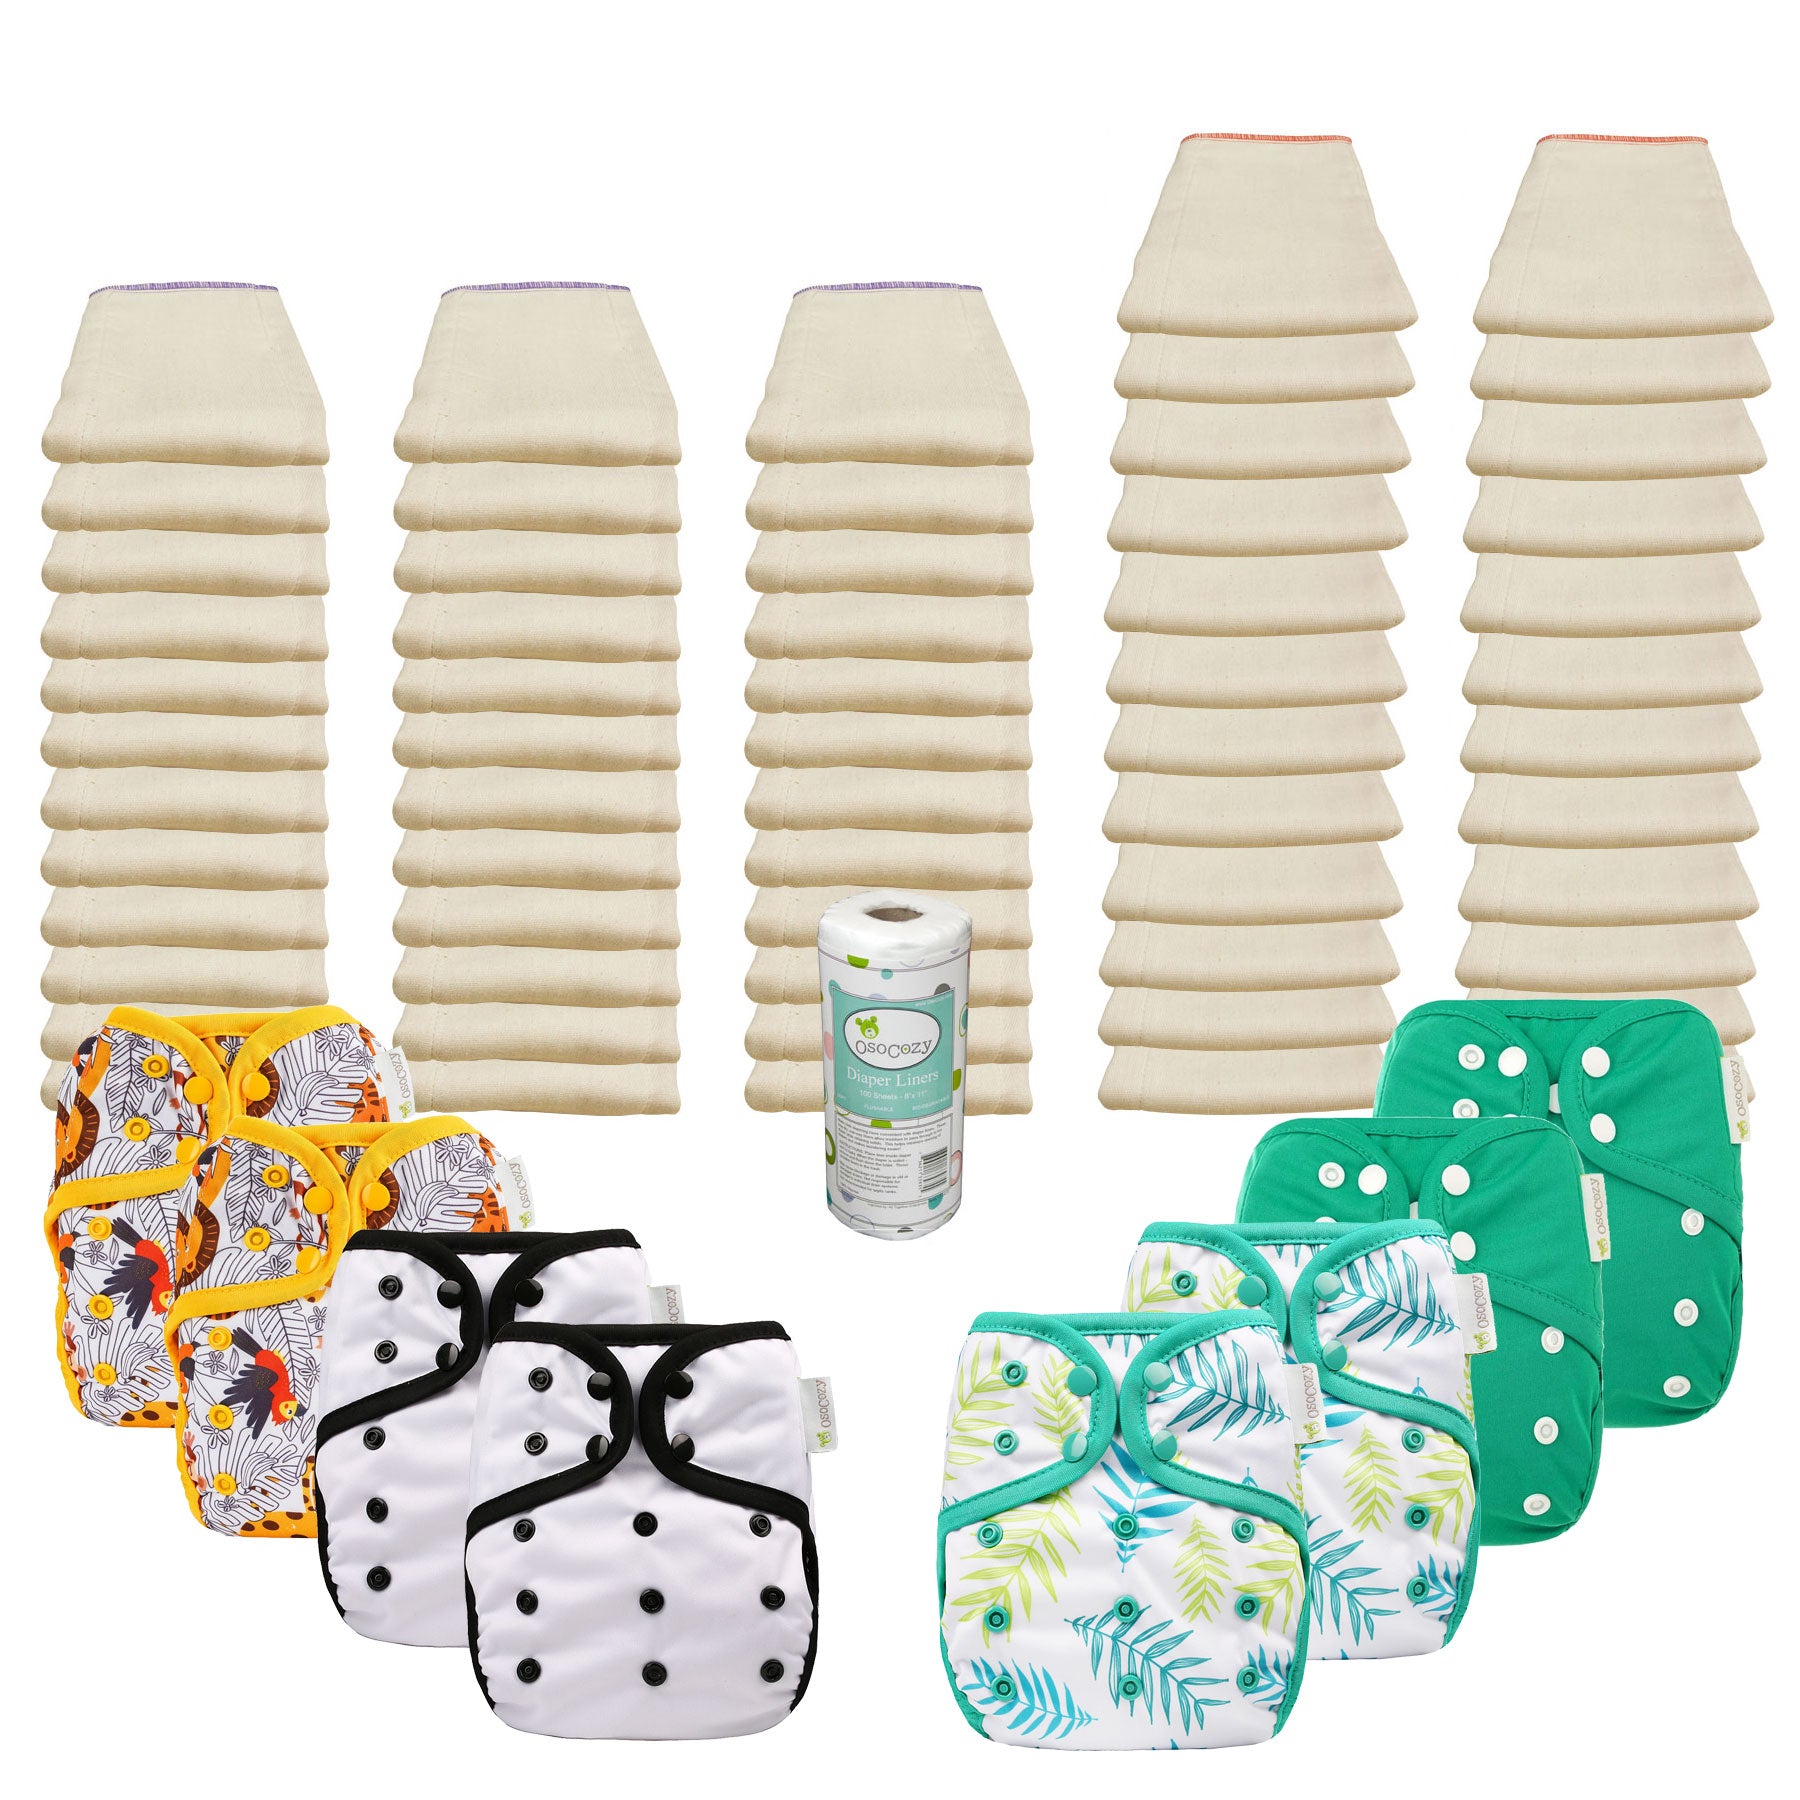 Better Fit Basic Prefold Diaper Packages with OsoCozy One Sized Covers